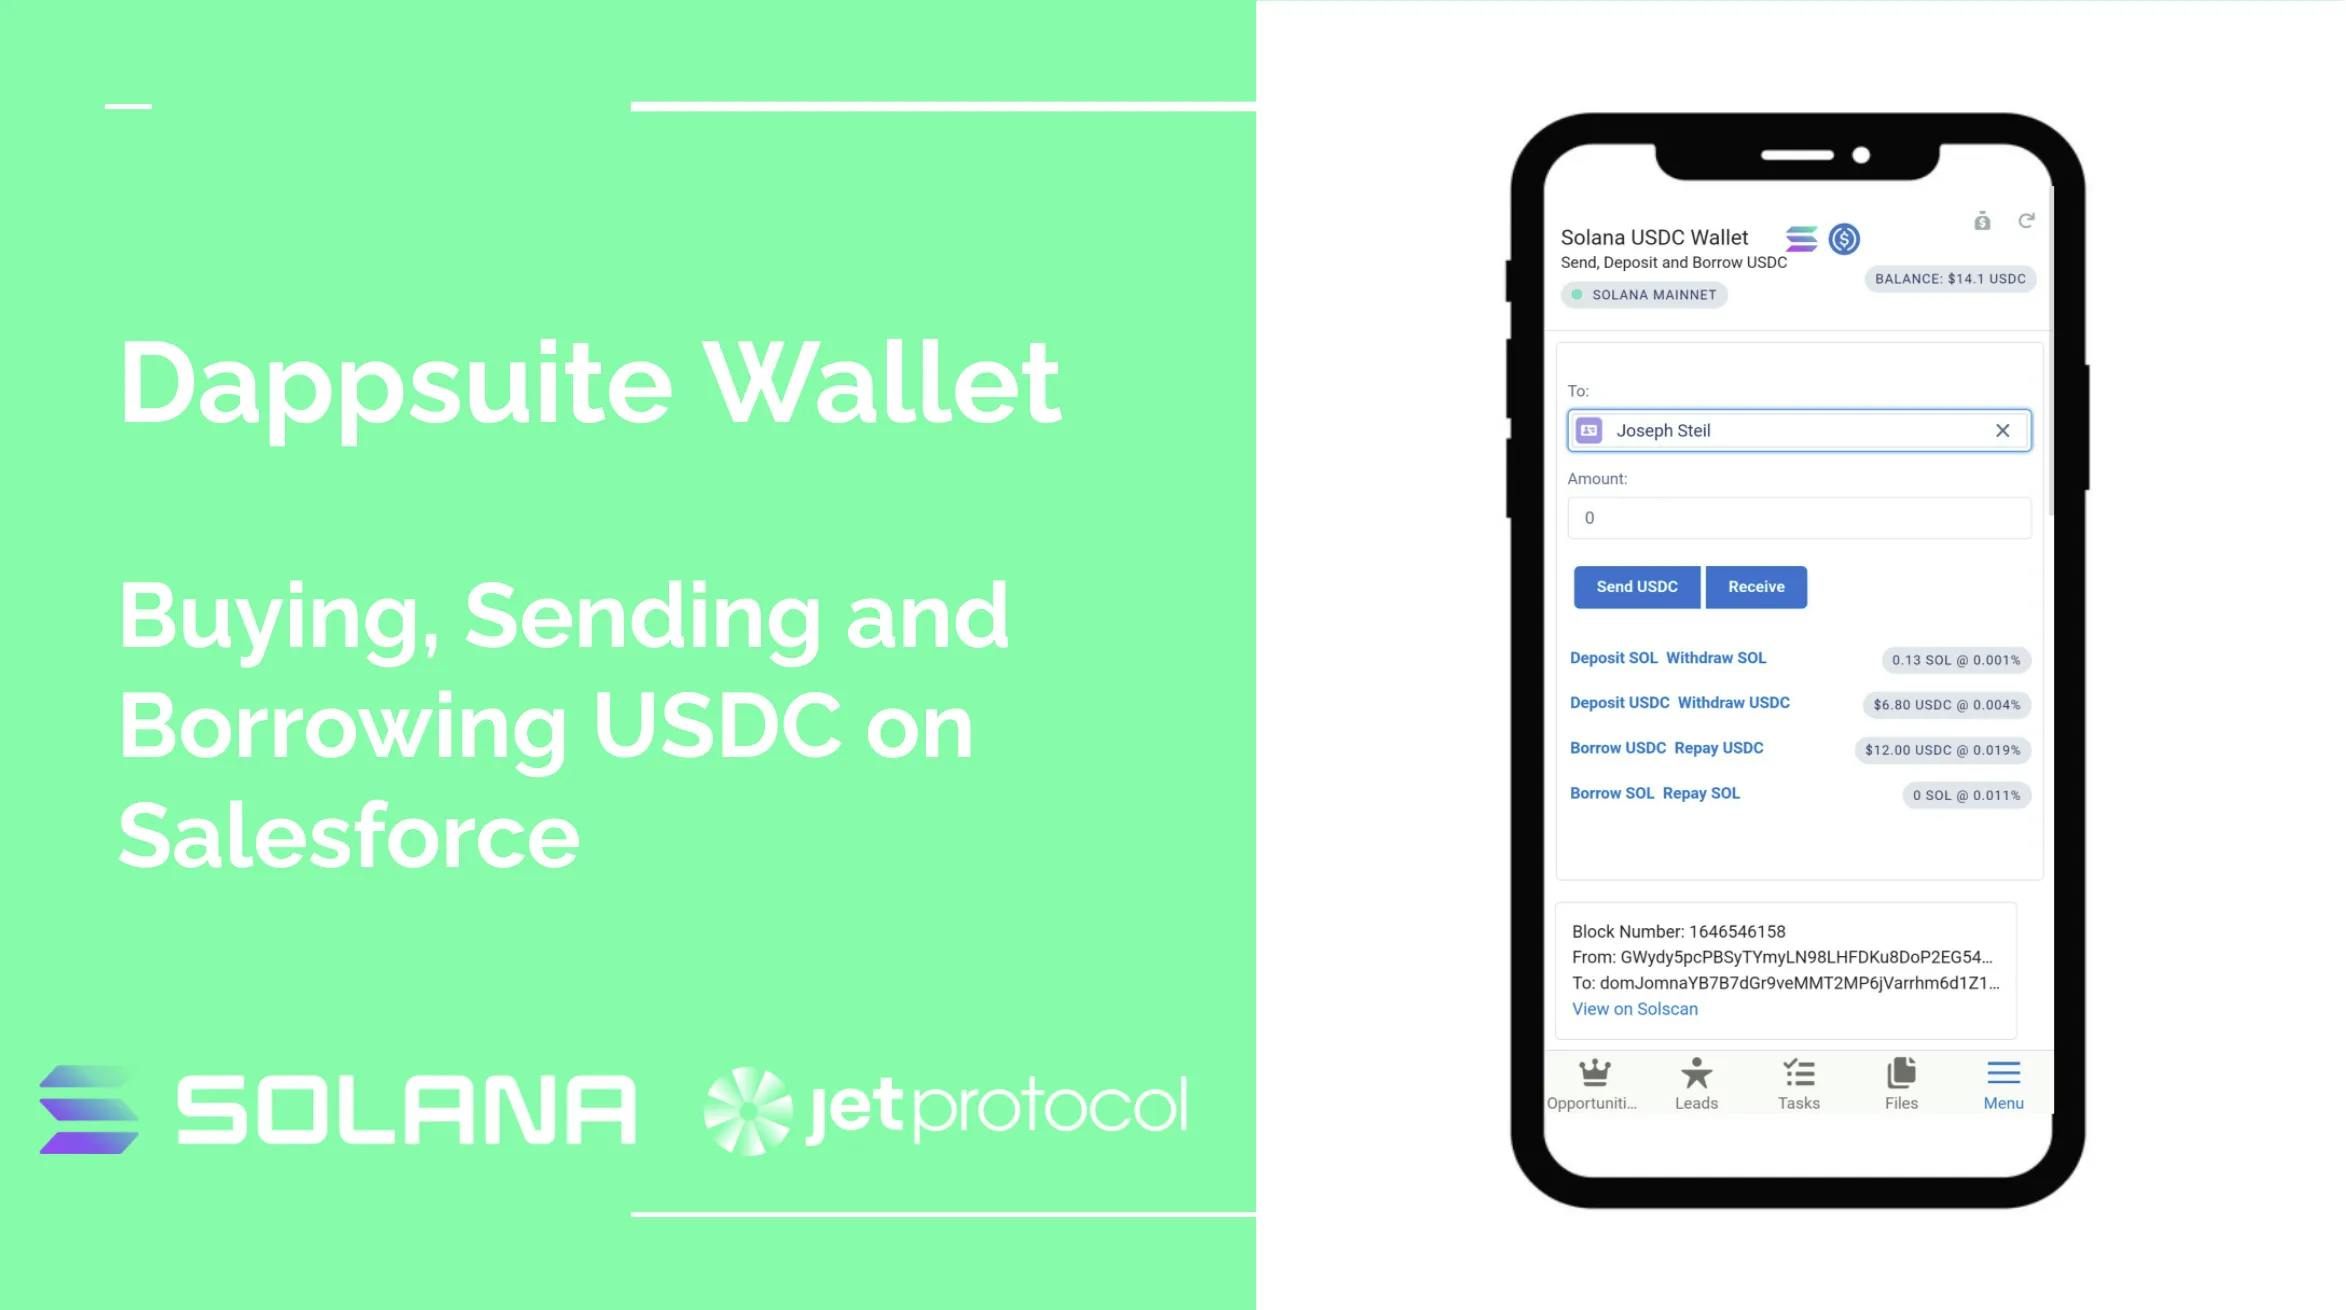 Dappsuite Wallet - Buy, Borrow and Send USDC on Salesforce